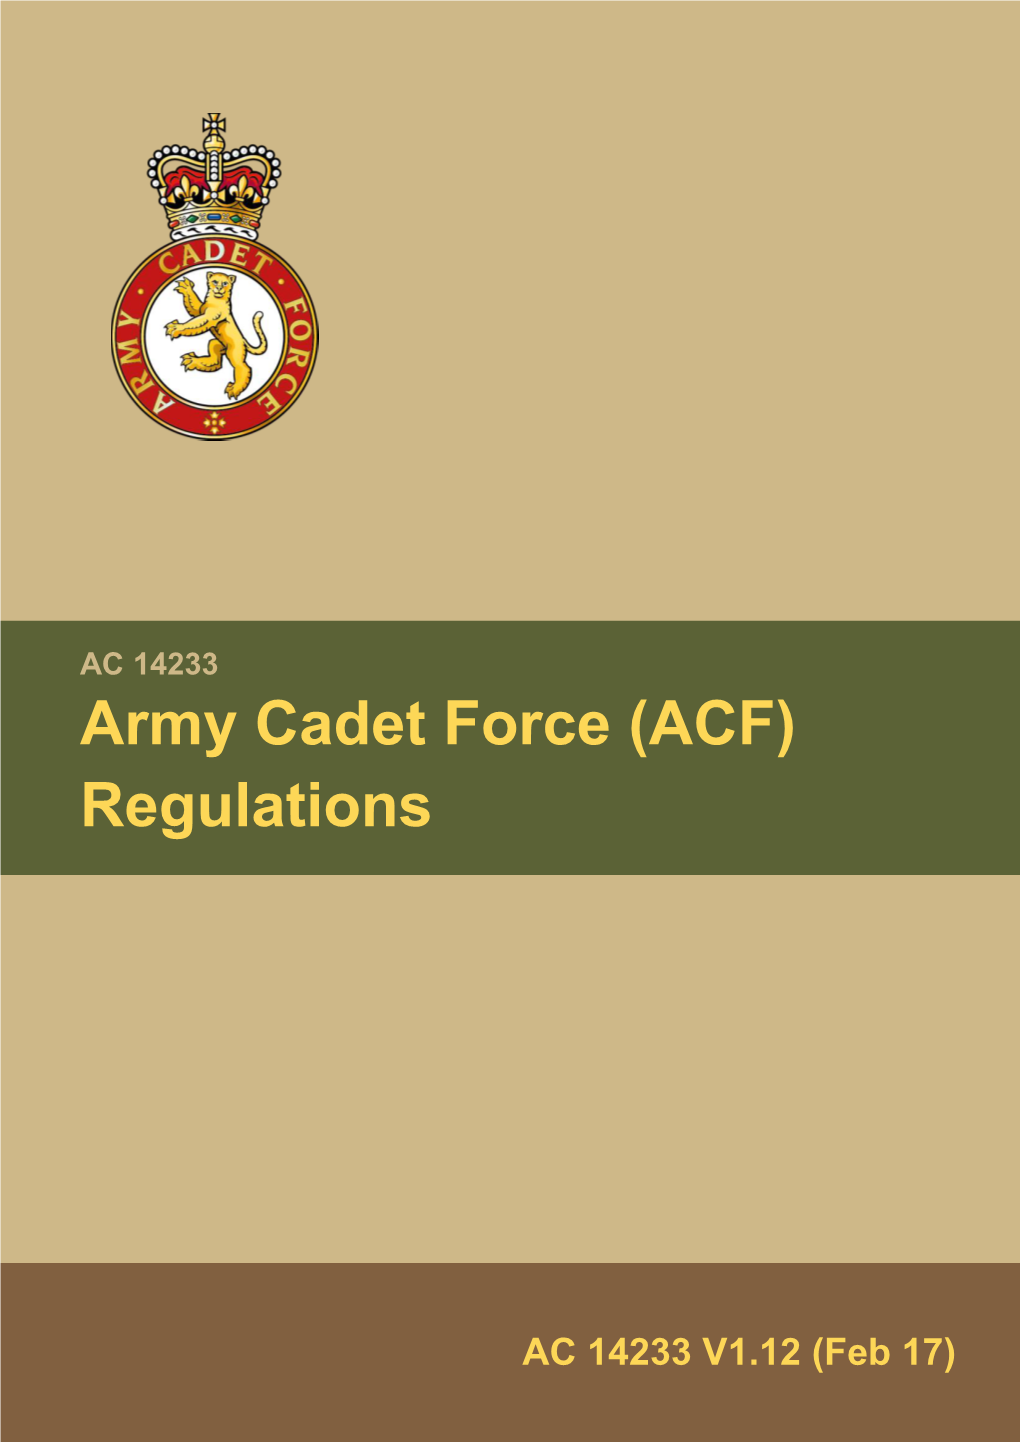 Army Cadet Force (ACF)